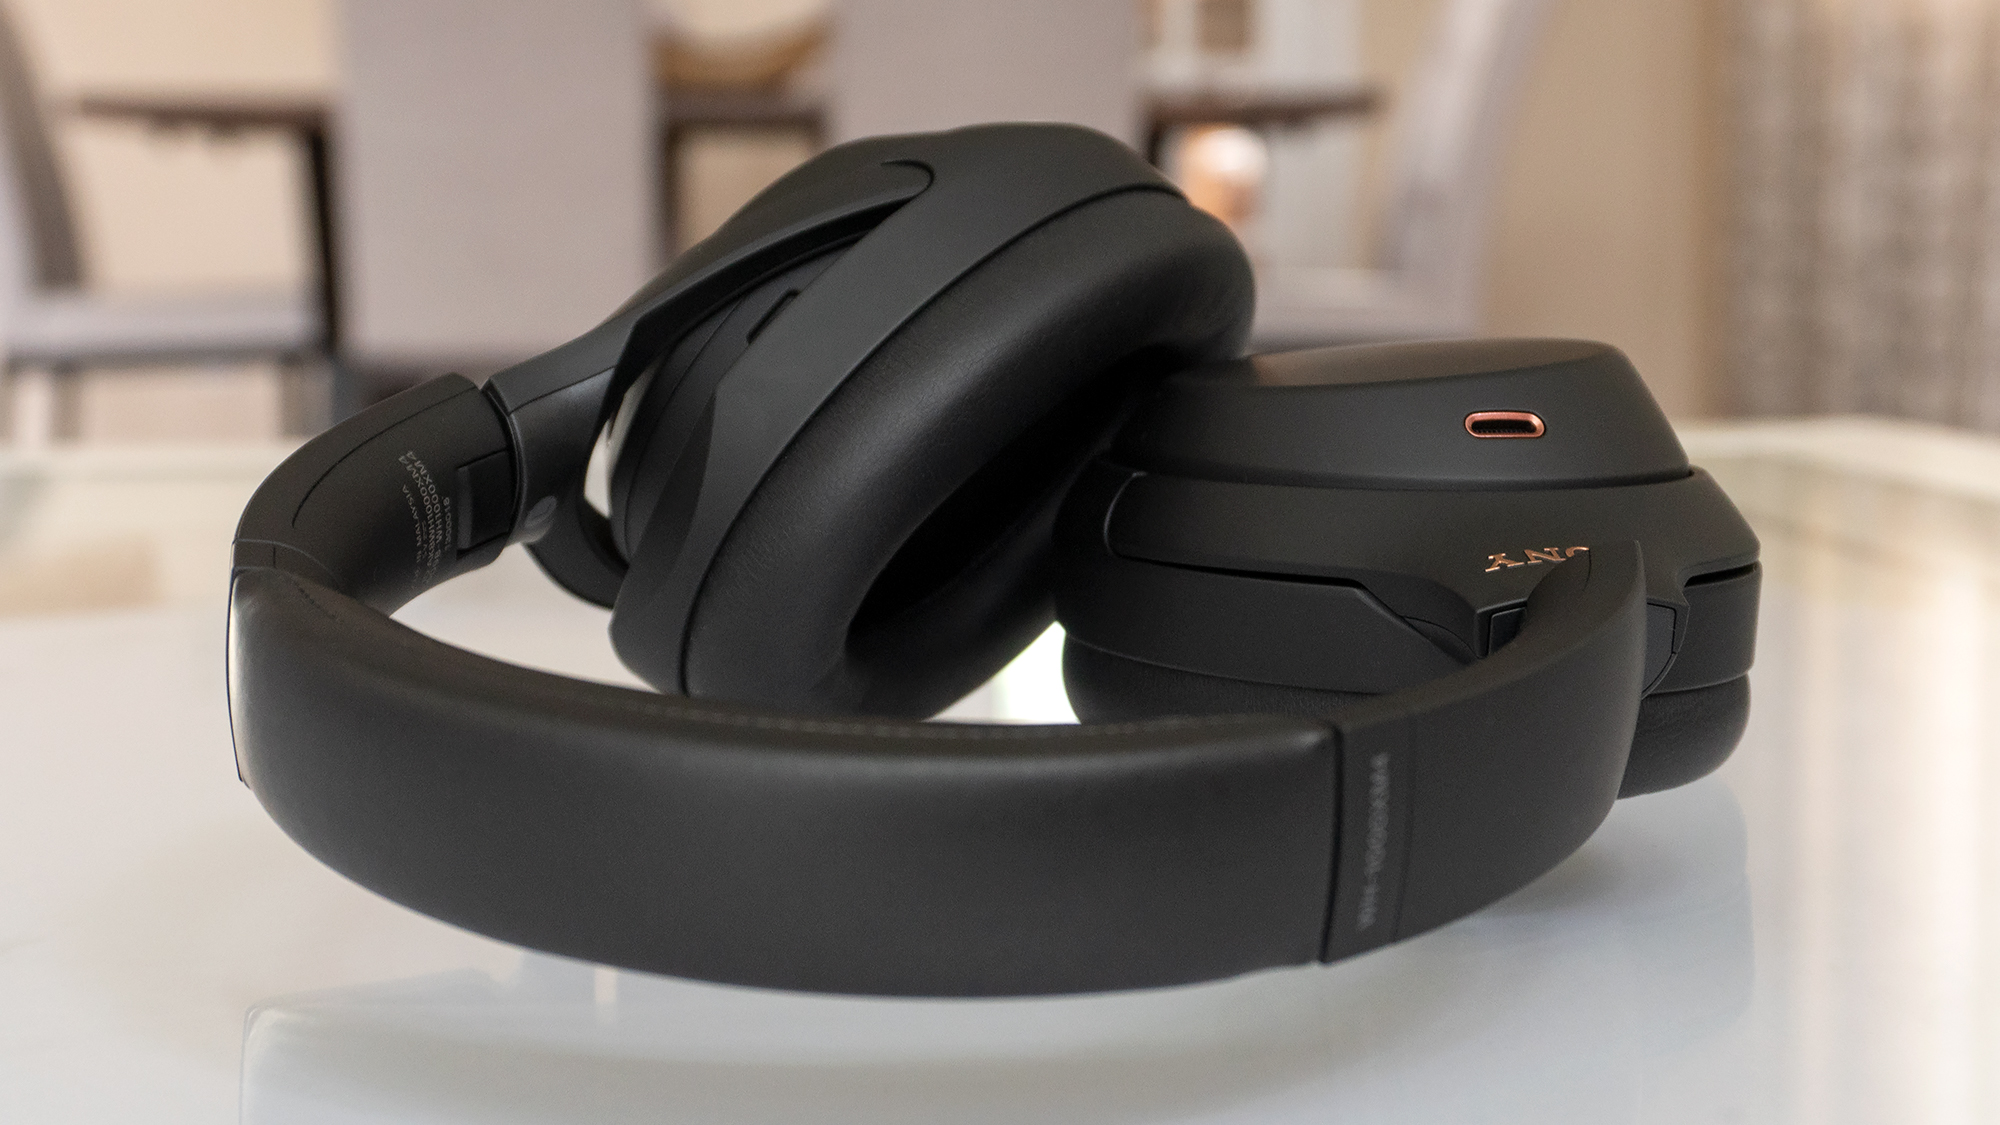 The WH-1000XM4 headphones aren't necessarily a must-have upgrade, but if you use multiple devices all day long, the ability to connect to two Bluetooth devices simultaneously with intelligent automatic switching is hard to live without. (Photo: Andrew Liszewski/Gizmodo)